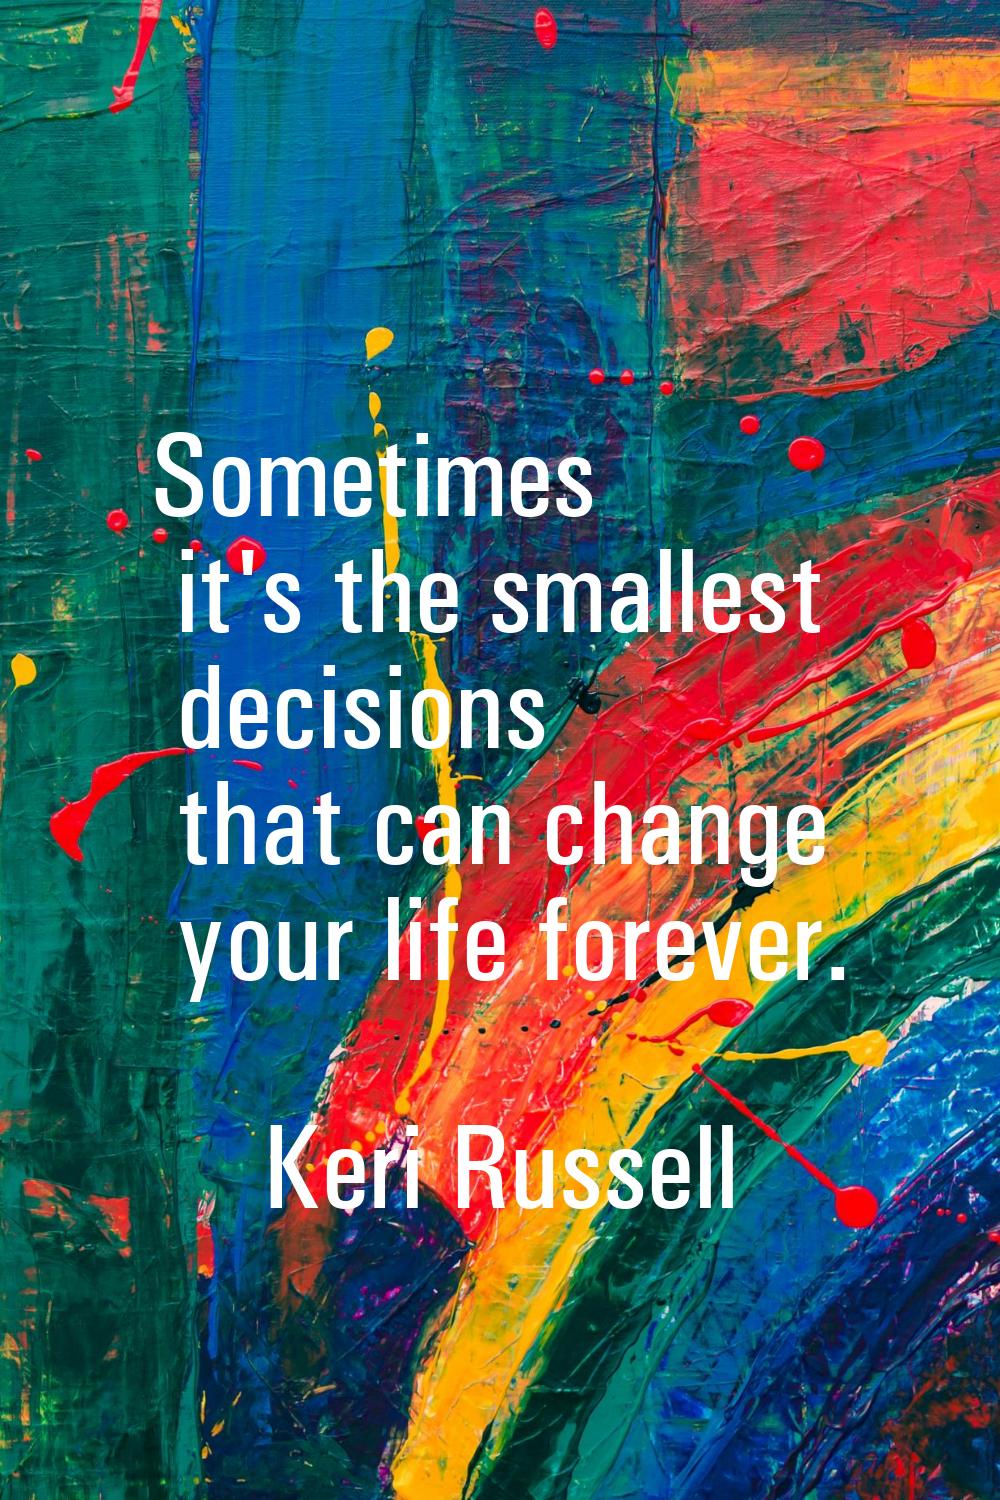 Sometimes it's the smallest decisions that can change your life forever.